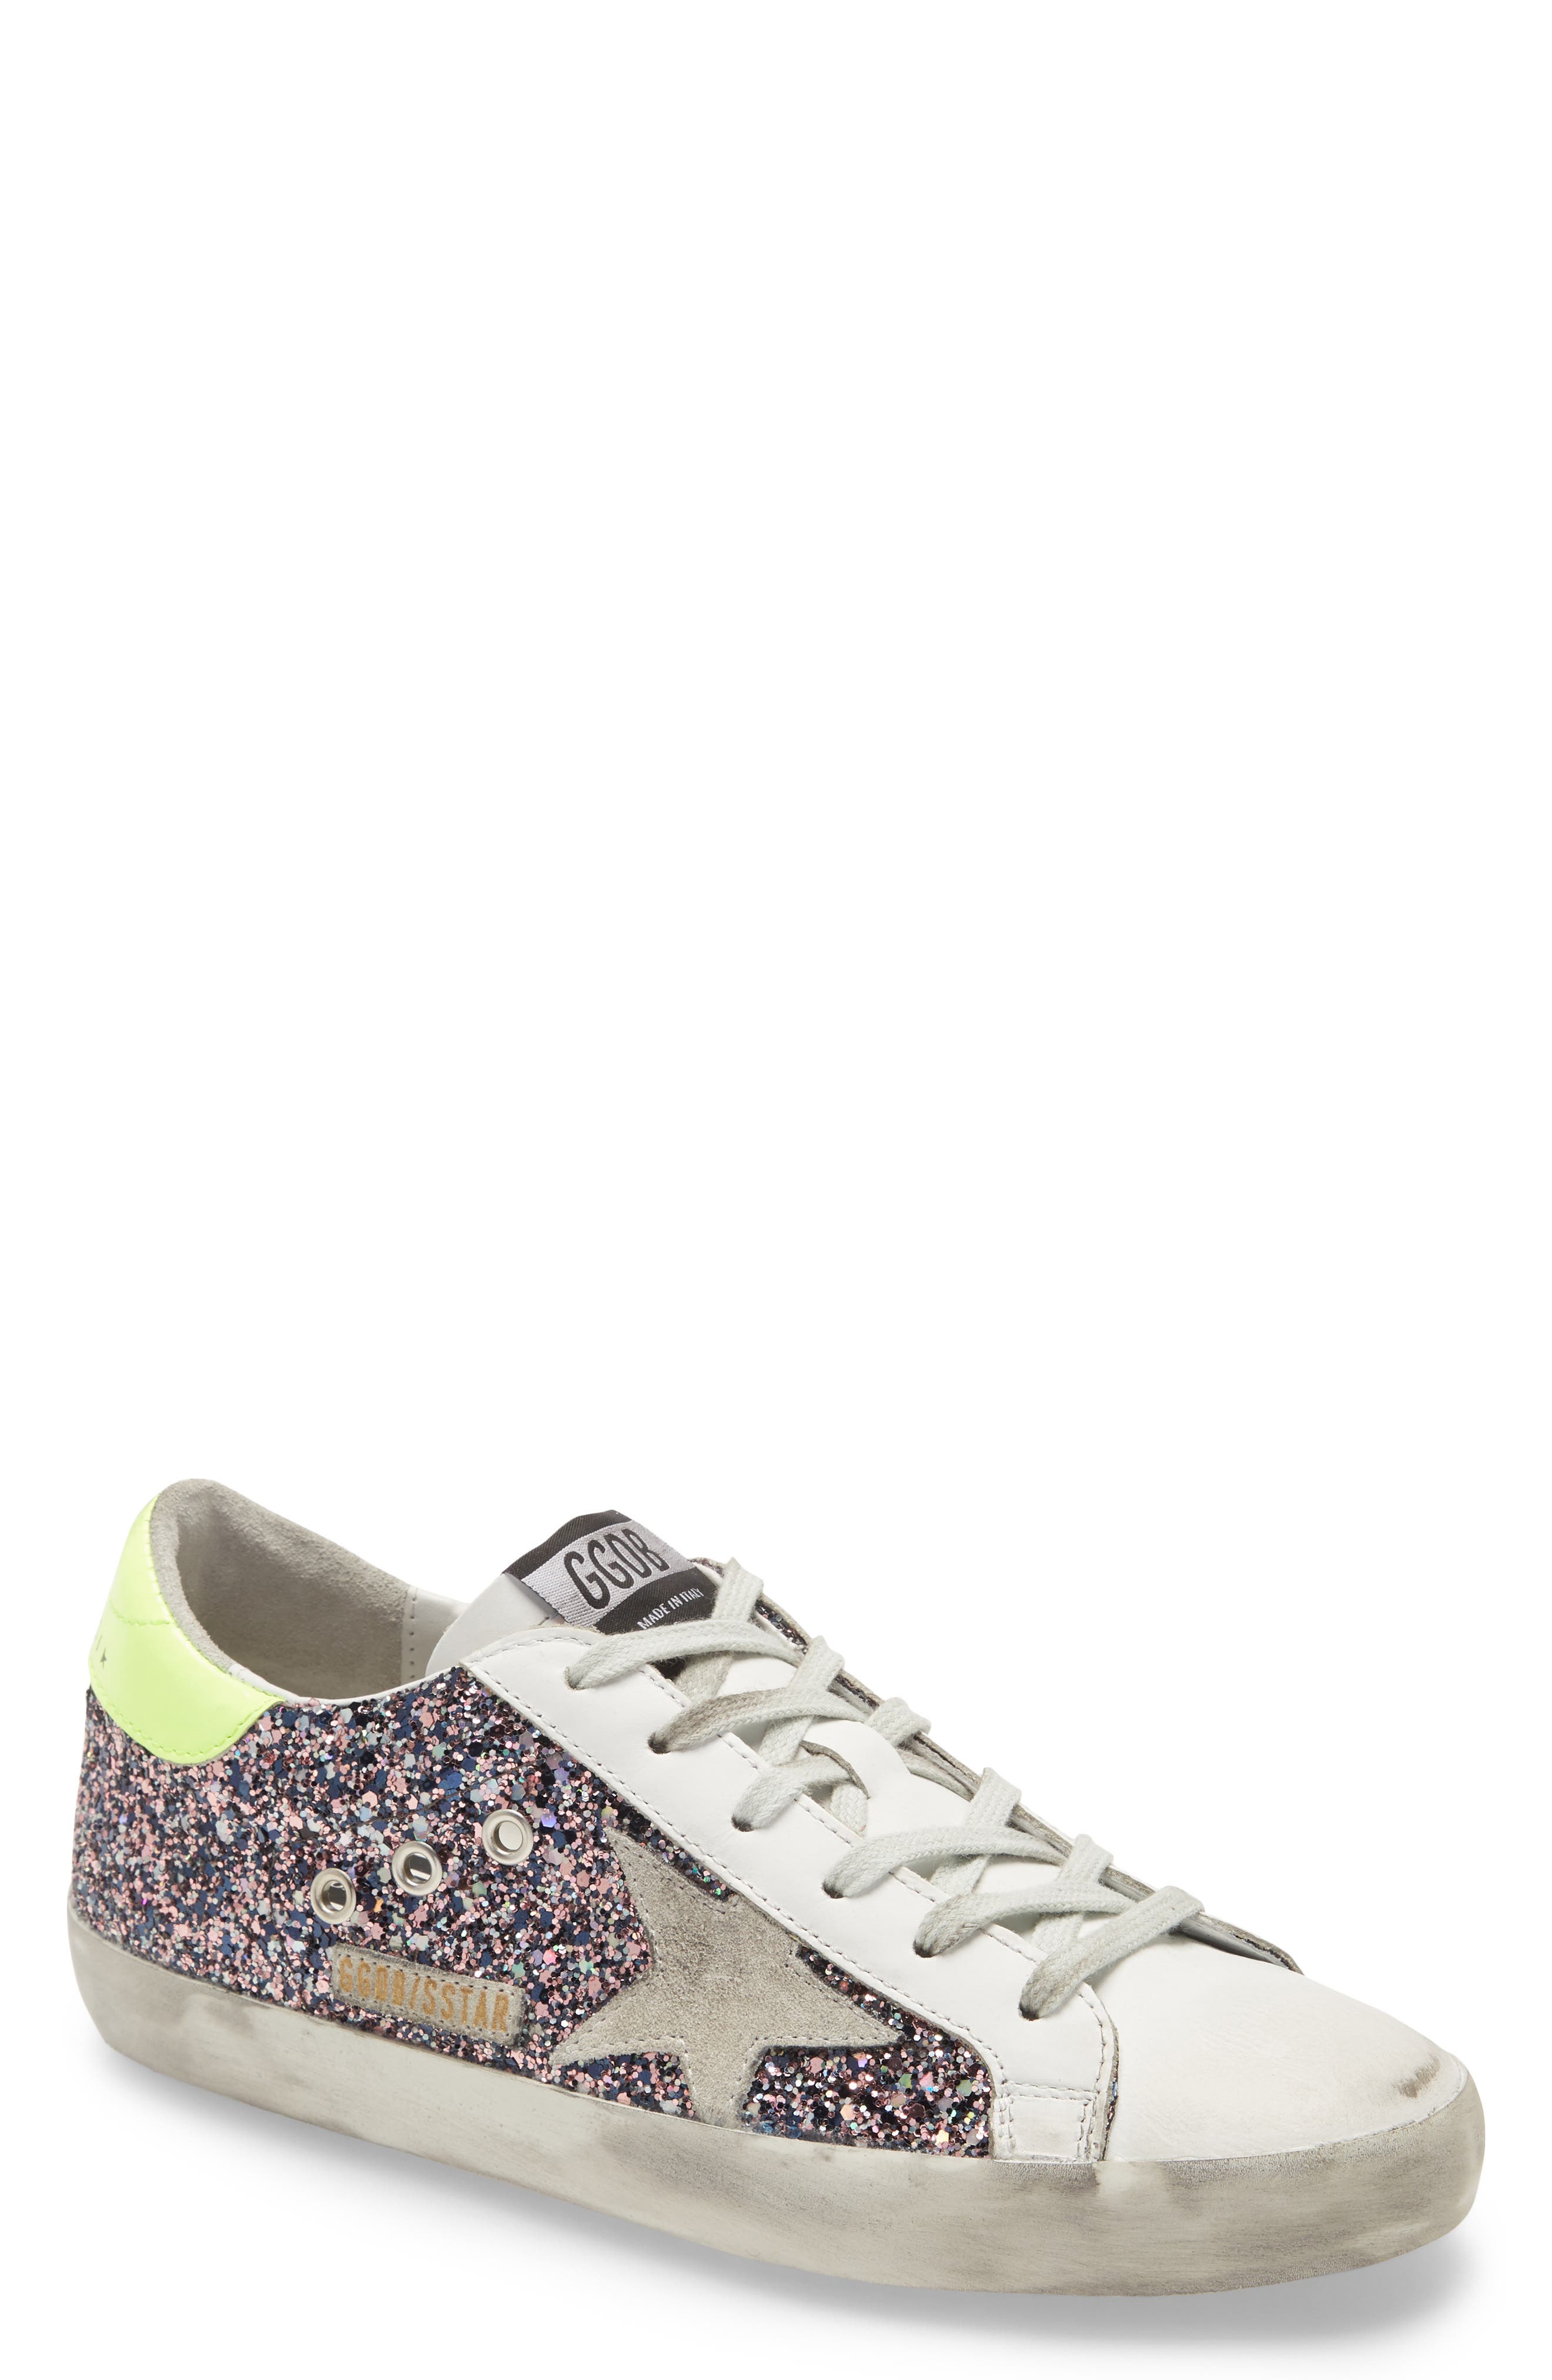 sparkly golden goose sneakers